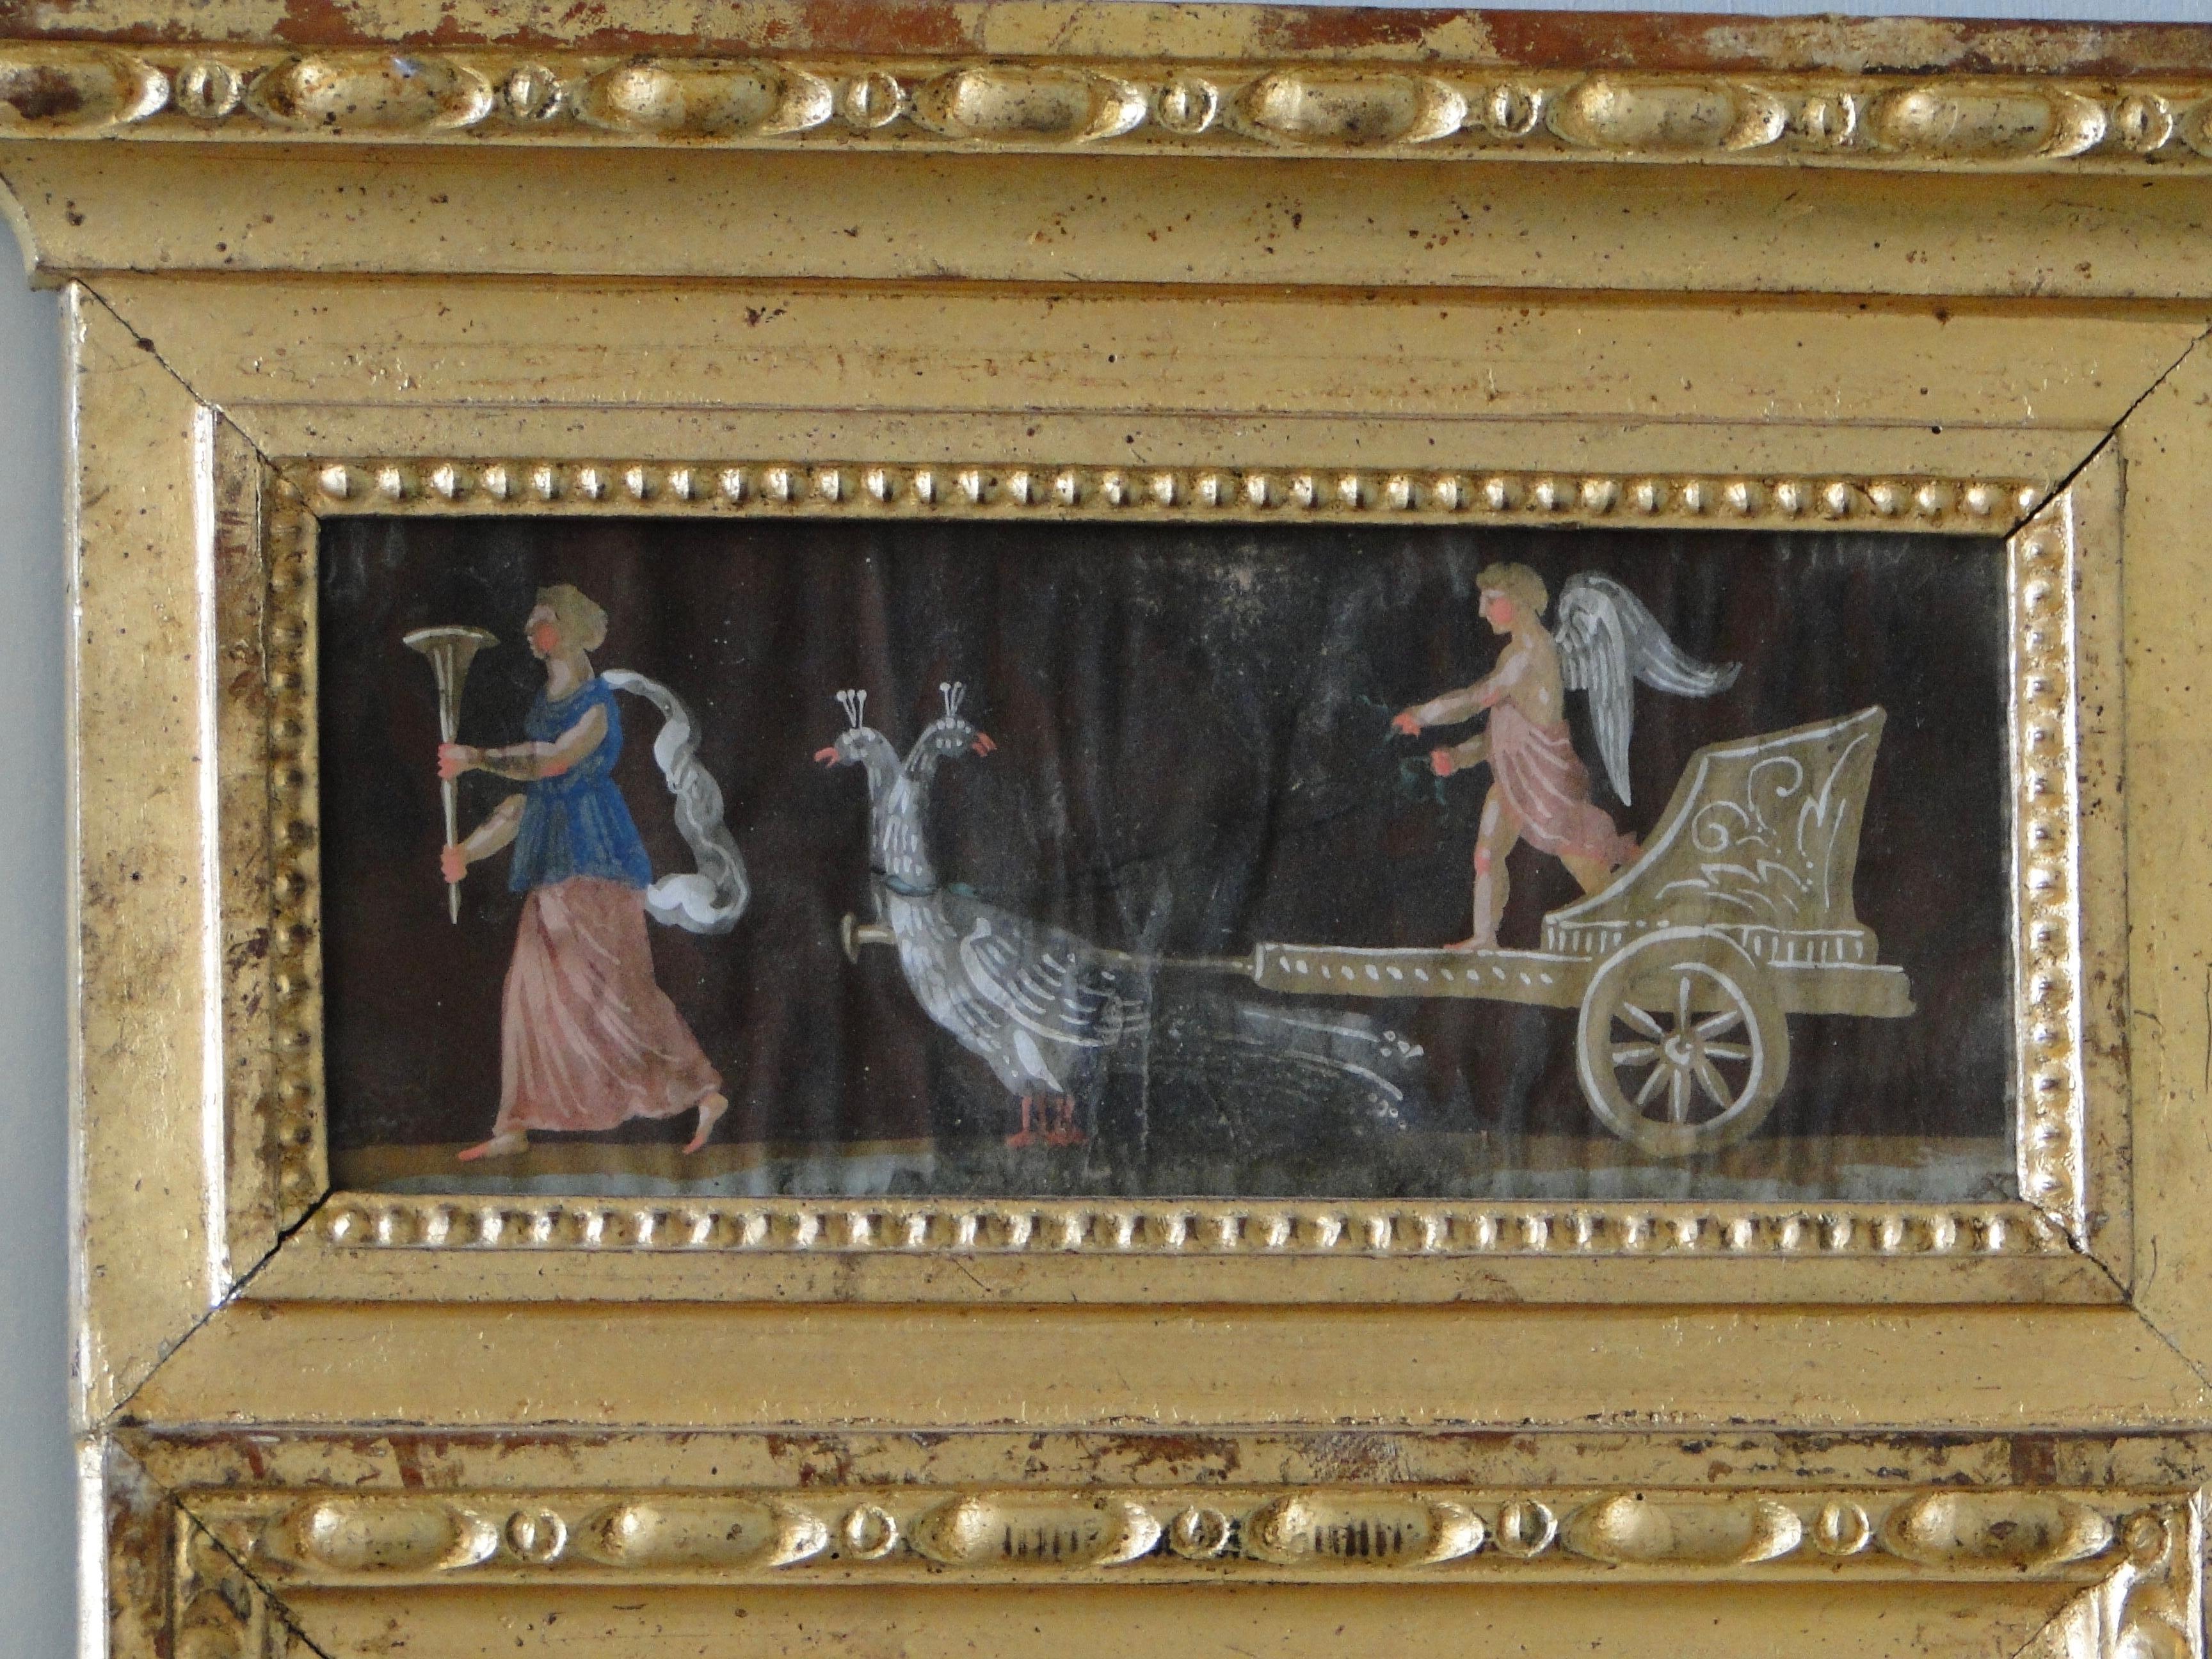 Late Gustavian mirror, gilded wood, glass in 2 parts, beautiful Empire painting on paper 2 peacock pulling cherub on chariot.